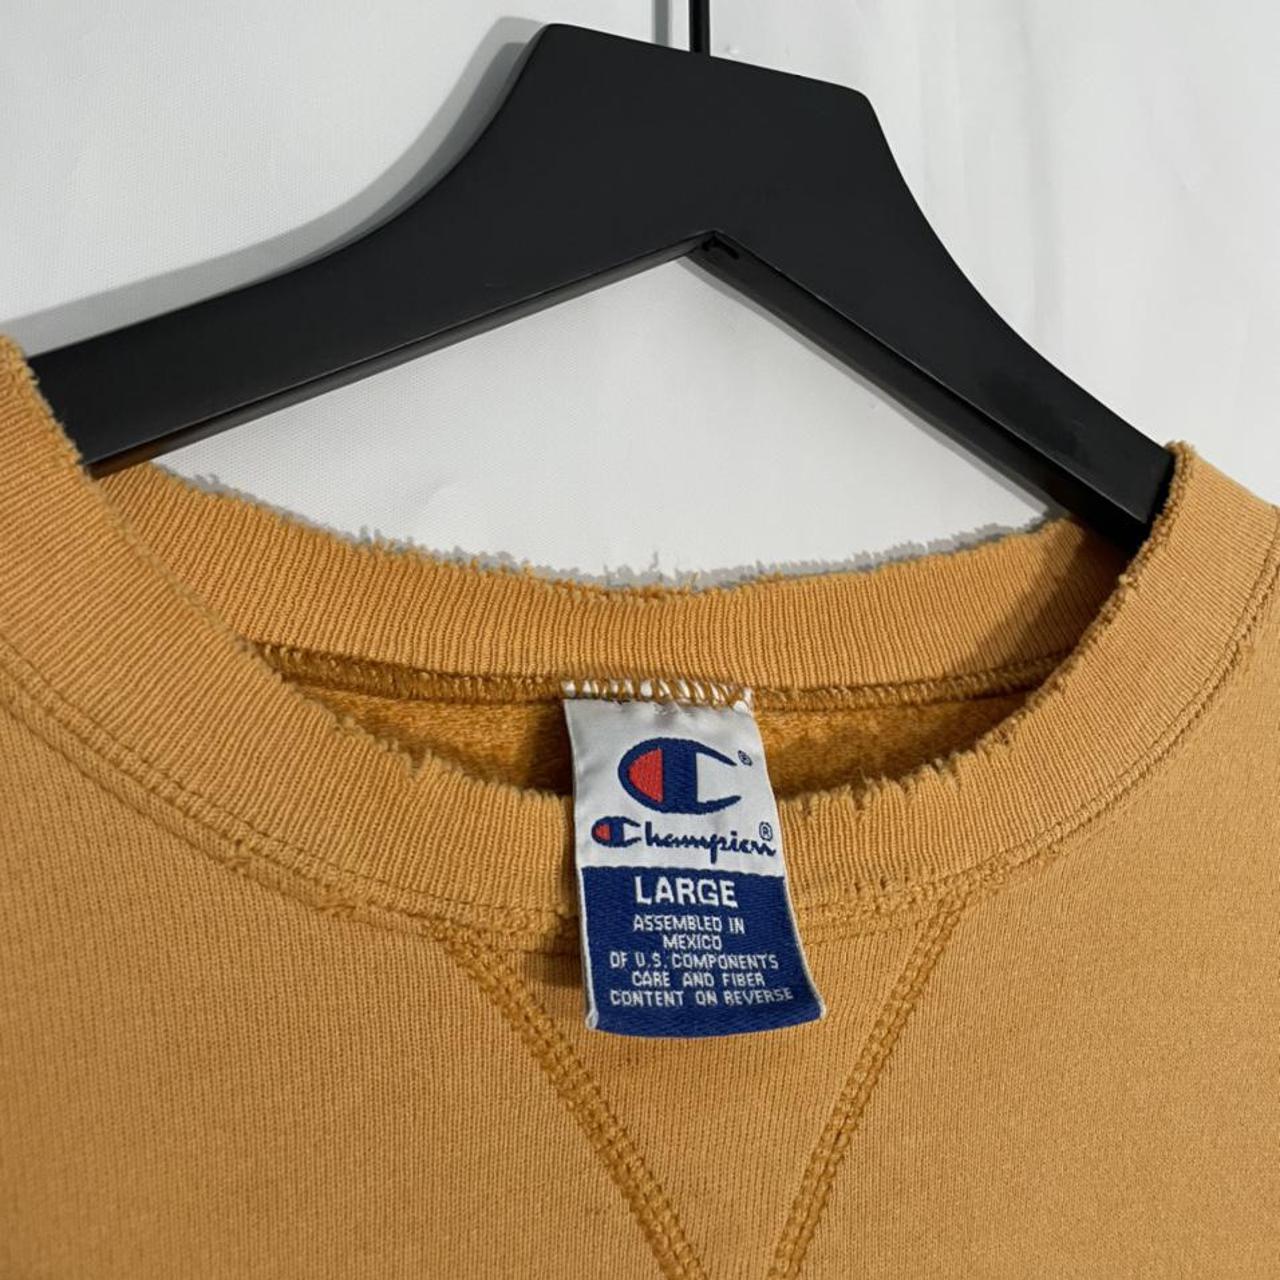 Product Image 4 - Champion Essential Yellow 90s Sweater

Champion